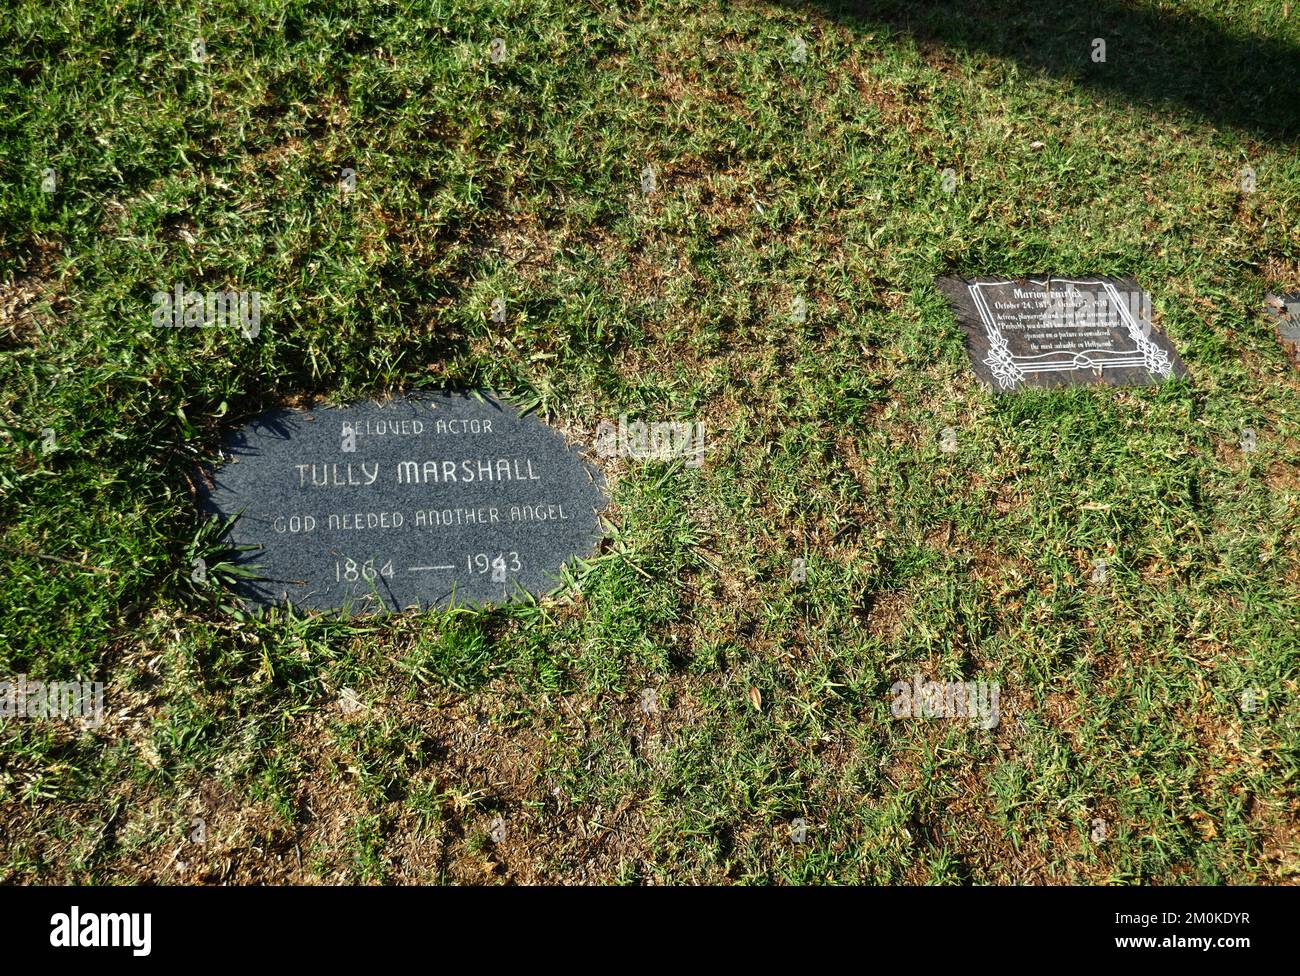 Los Angeles, California, USA 3rd December 2022 Actor Tully Marshall's Grave and Marion Fairfax's Grave in Garden of Legends at Hollywood Forever Cemetery on December 3, 2022 in Los Angeles, California, USA. Photo by Barry King/Alamy Stock Photo Stock Photo